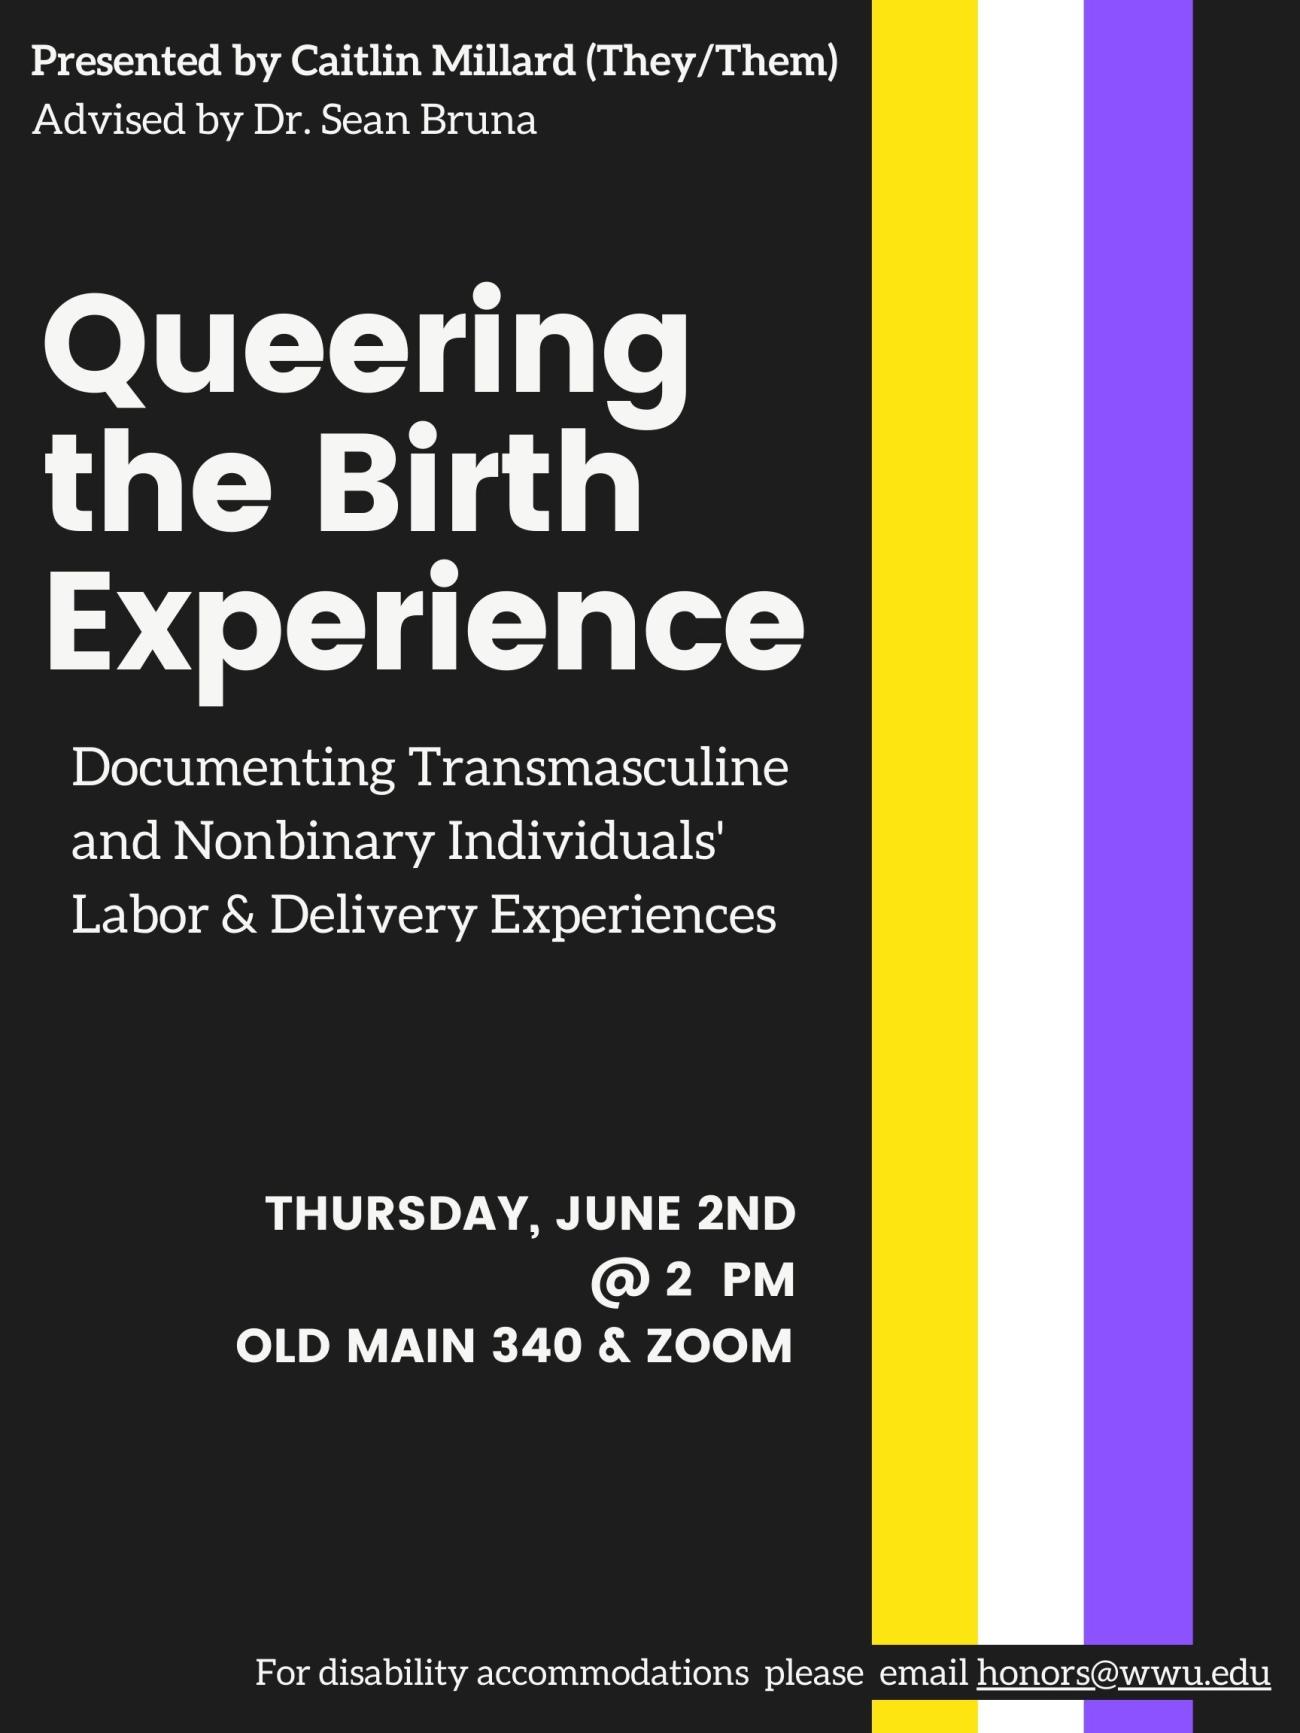 Black background containing a strip of yellow, white, violet, and black to form the nonbinary pride flag. The text reads "Presented by Caitlin Millard (they/them). Advised by Dr Sean Bruna. Queering the Birth experience. Documenting Transmasculine and Nonbinary Individuals' Labor & Delivery Experiences. Thursday, June 2nd @ 2 pm. Old Main 340 & Zoom. For disability accommodations, please contact honors@wwu.edu."